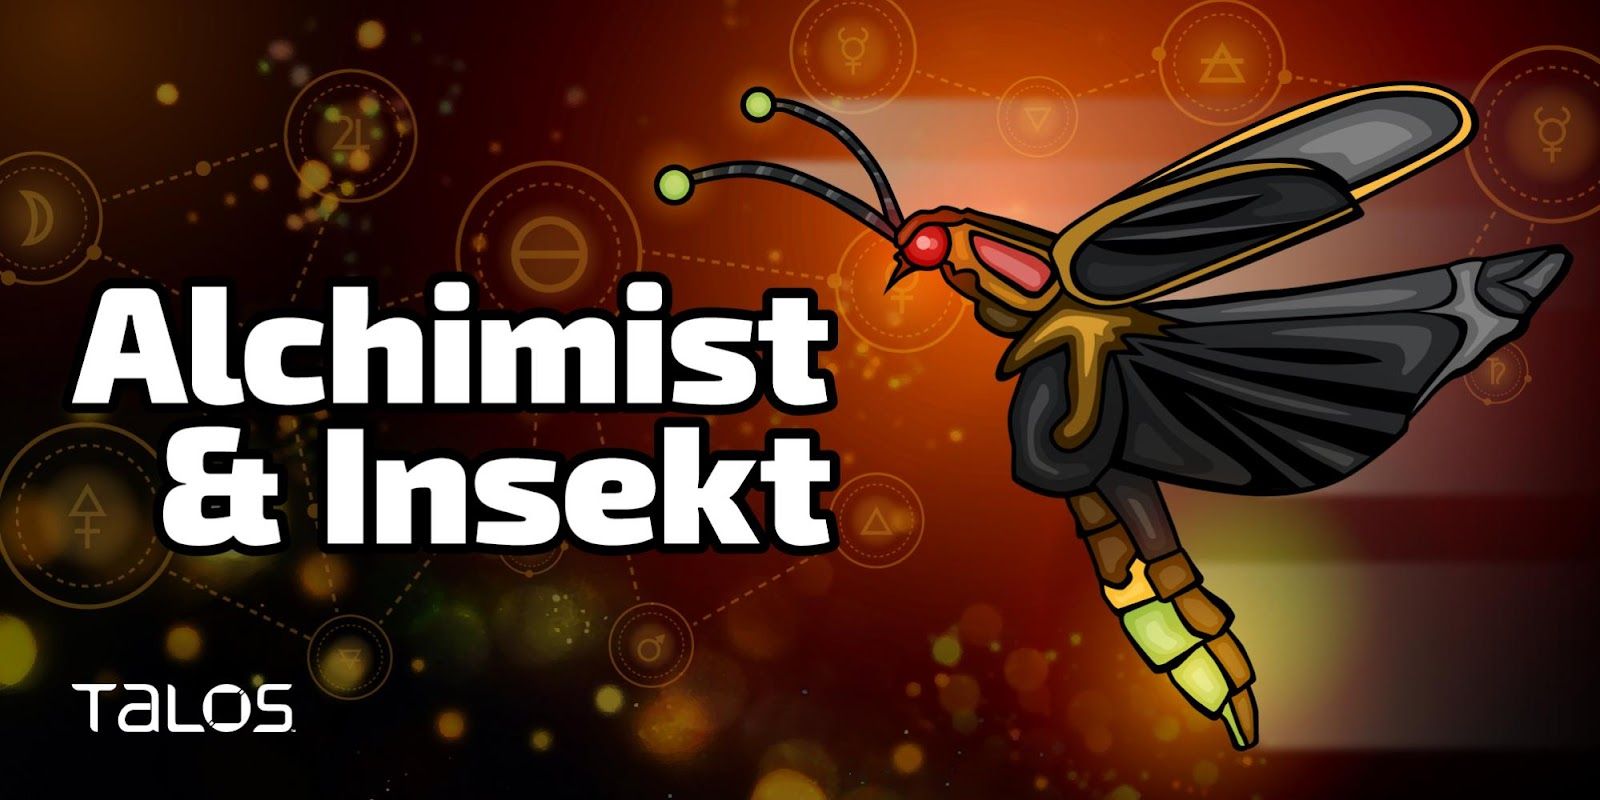 Alchimist: A new attack framework in Chinese for Mac, Linux and Windows